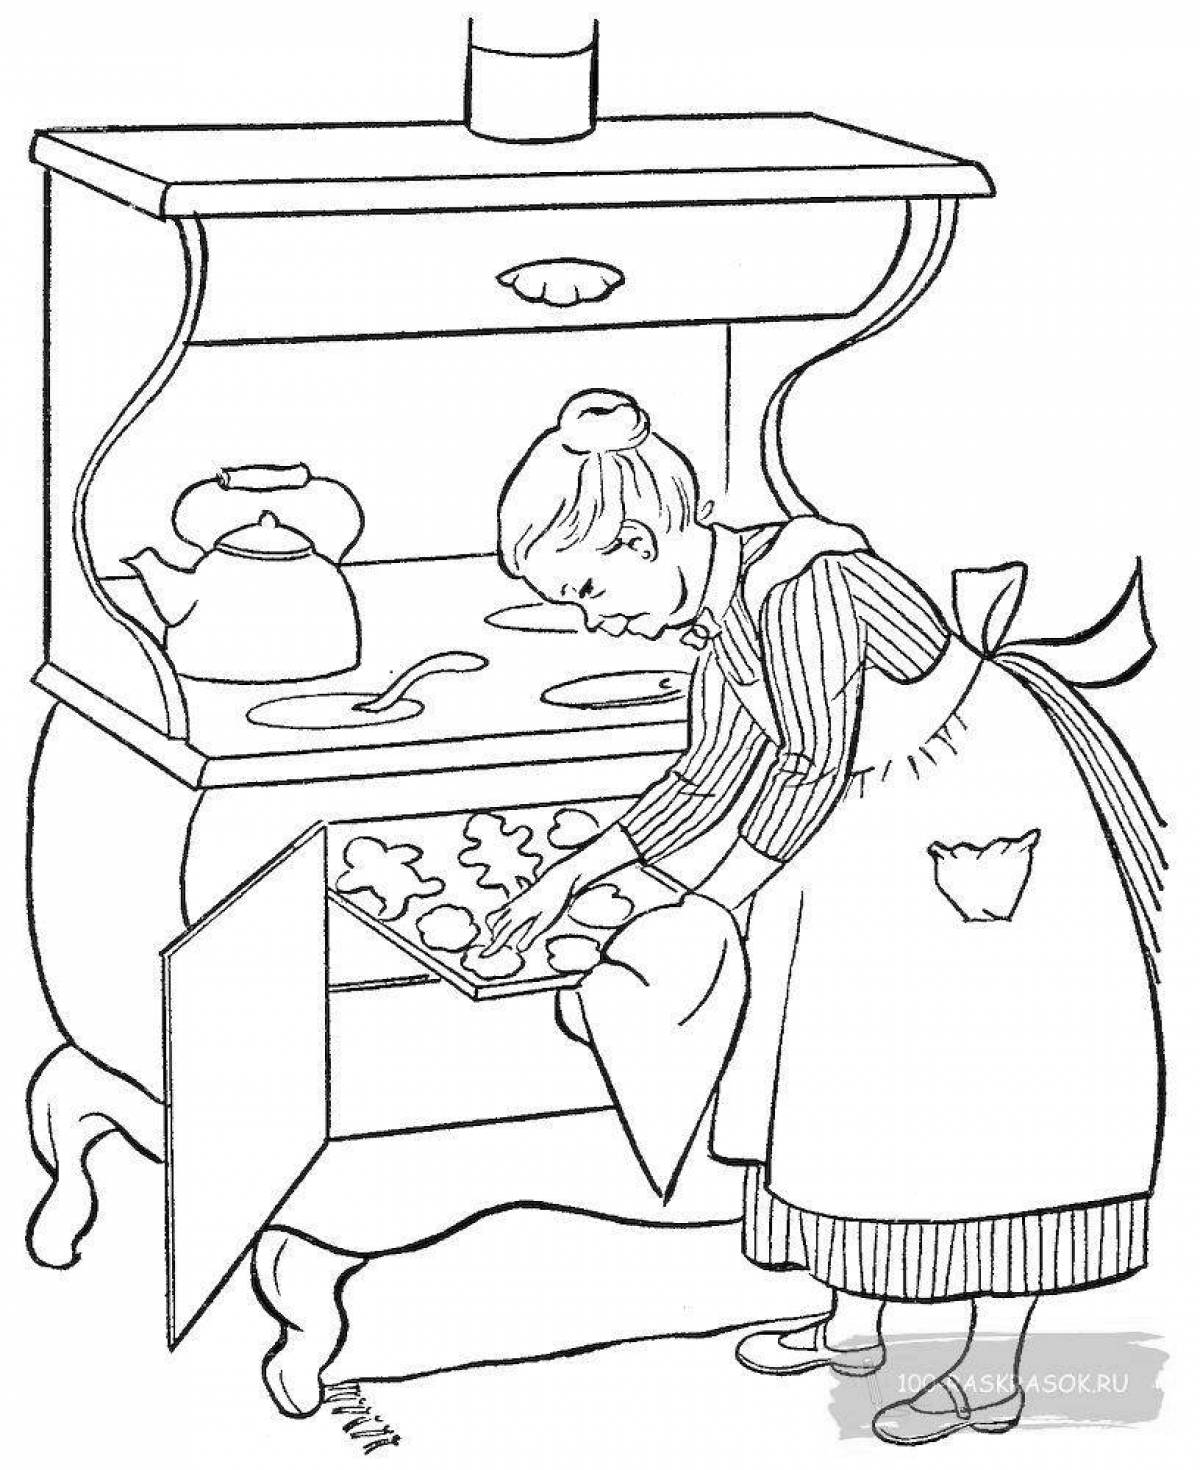 Coloring book magic oven for kids